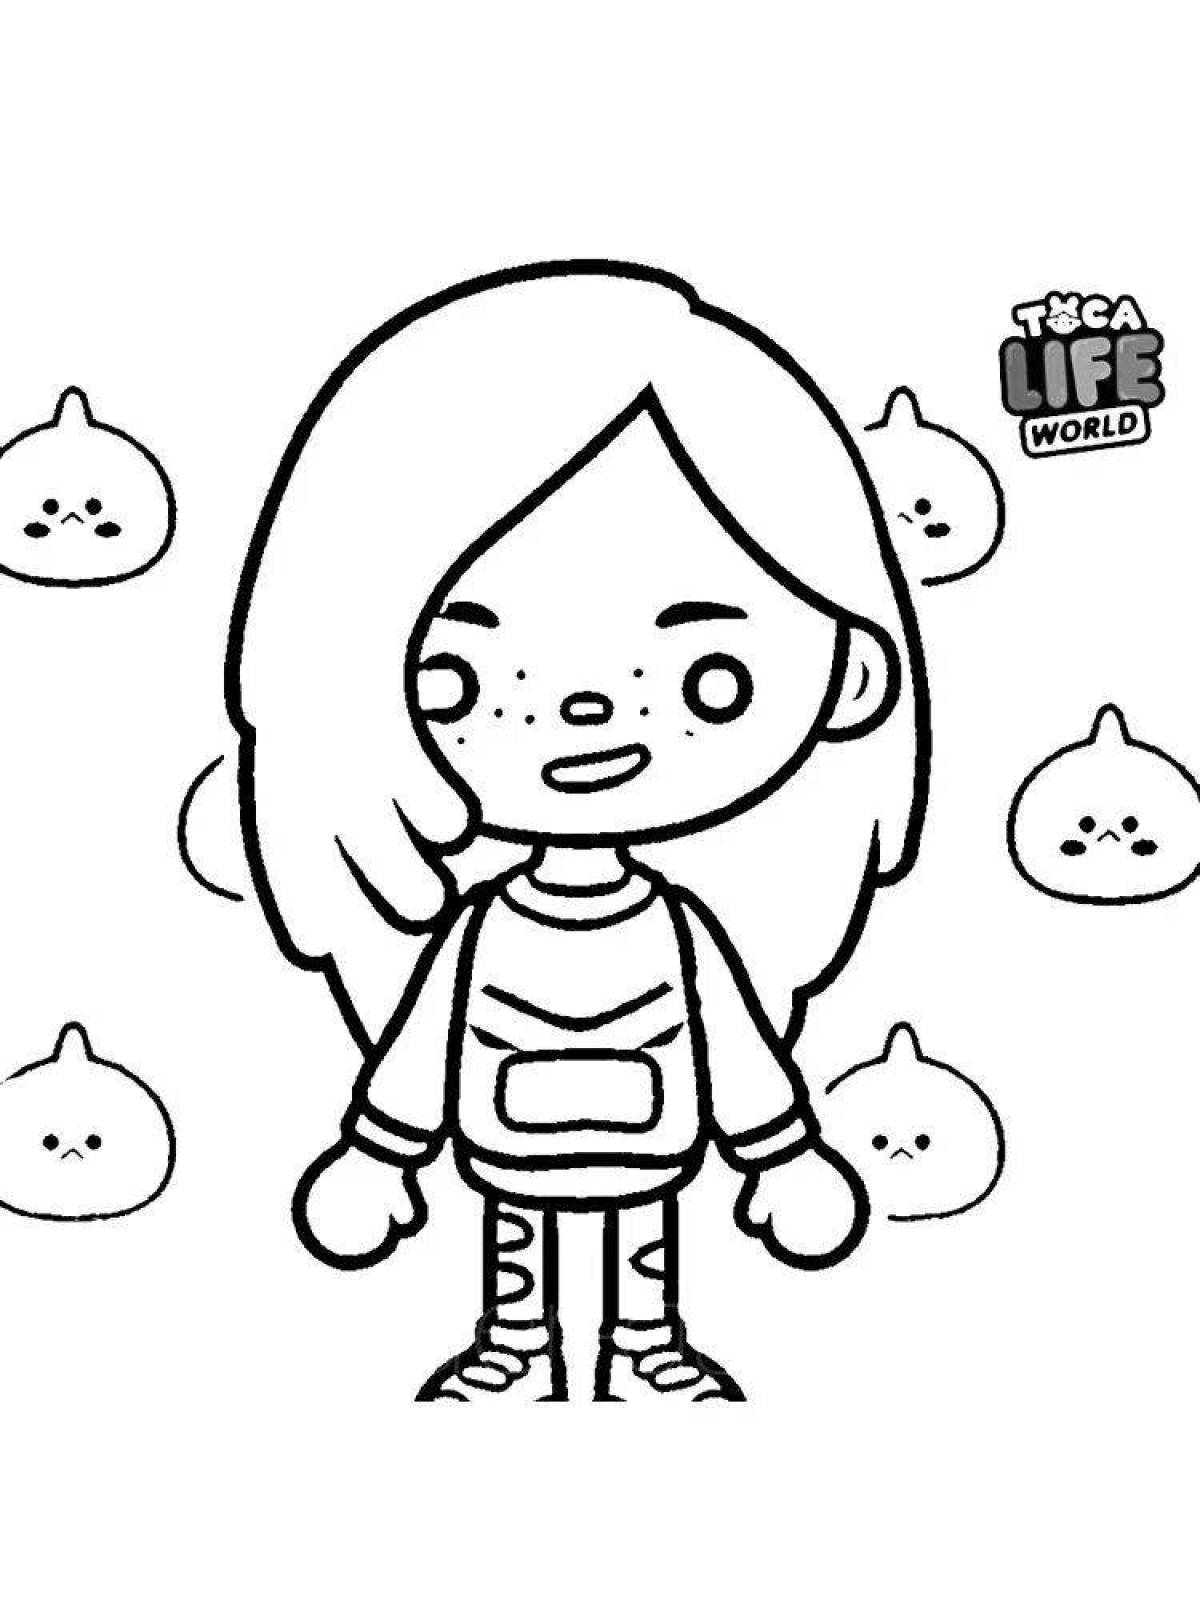 Colorful tok boca characters coloring page